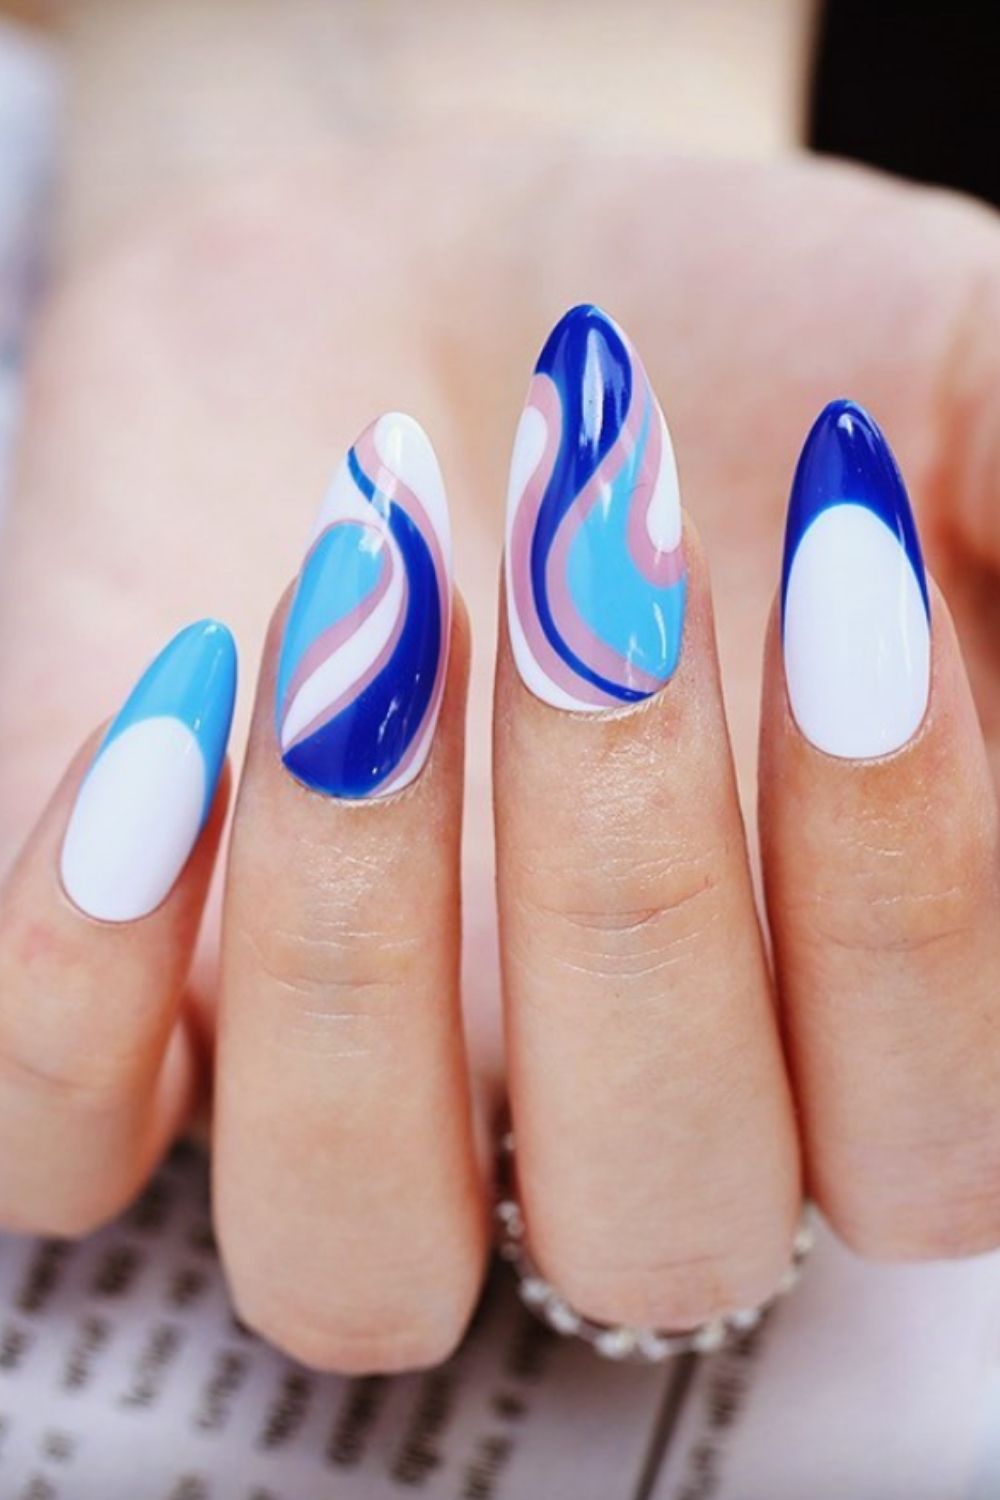 Light blue and white almond shaped nails